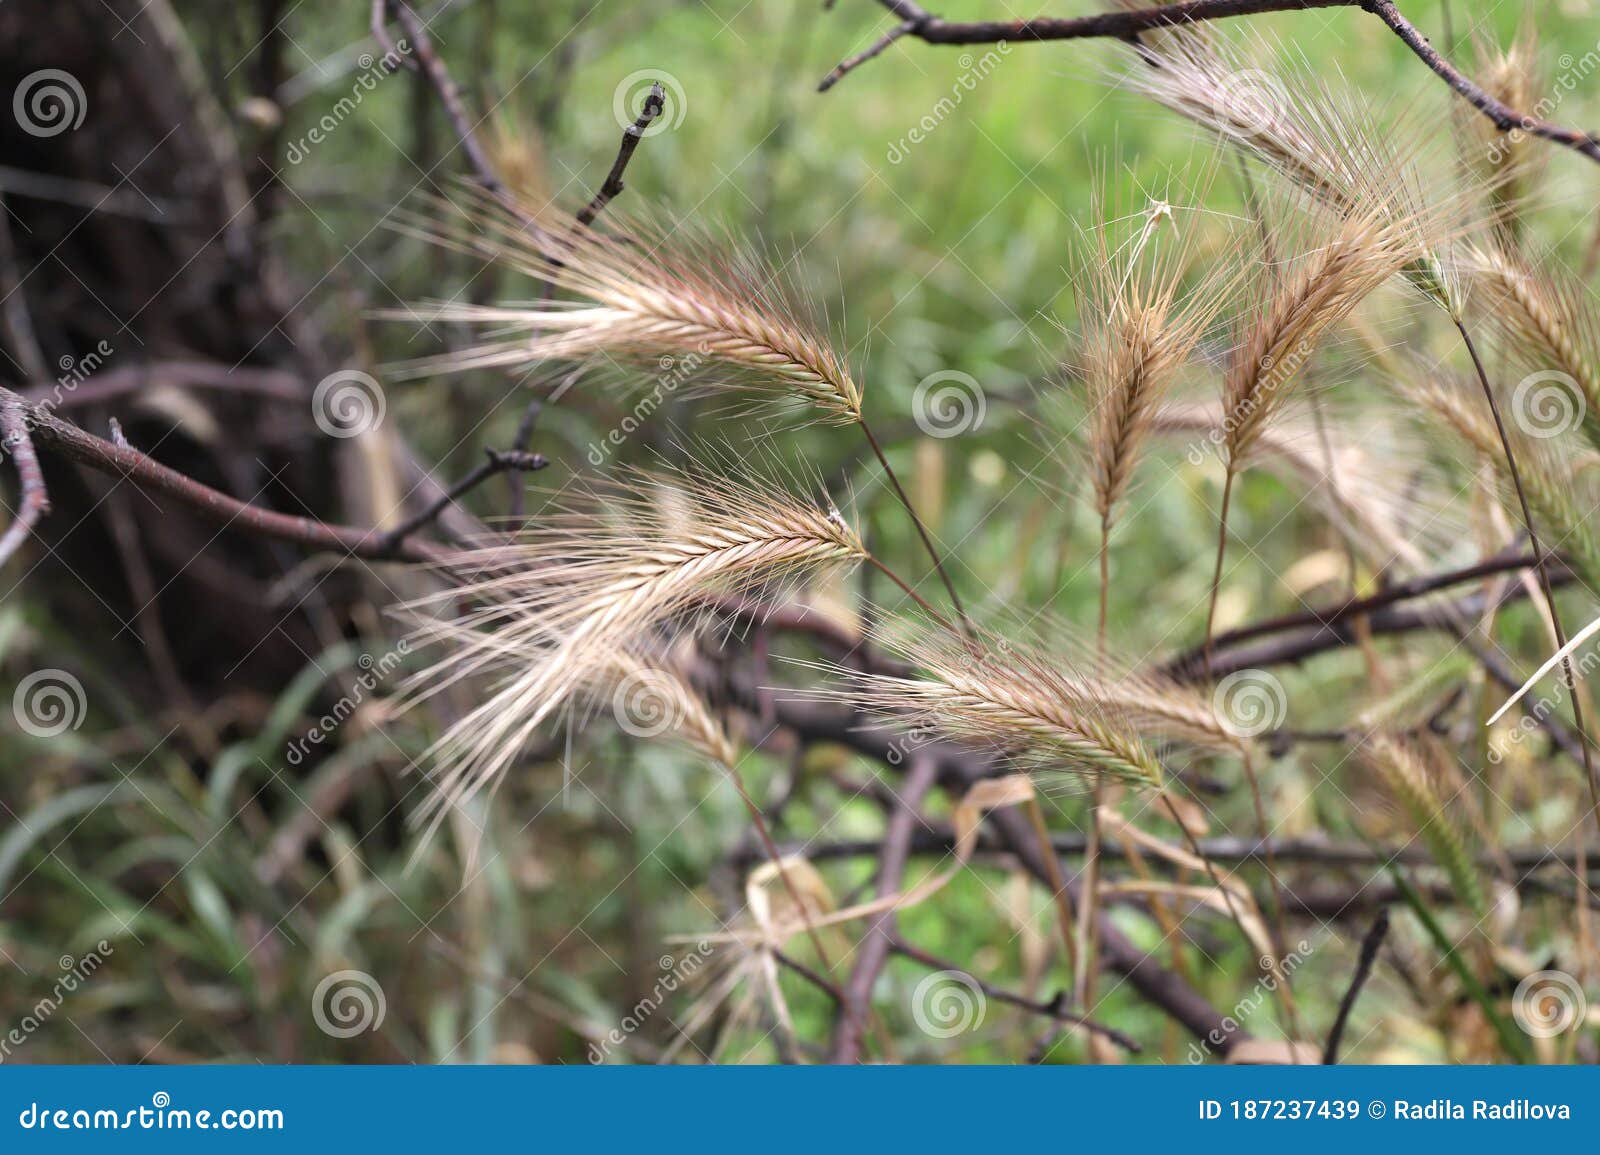 Grass Awns That Can Be Dangerous For Dogs June Grass Ears Stock Image Image Of Dogs